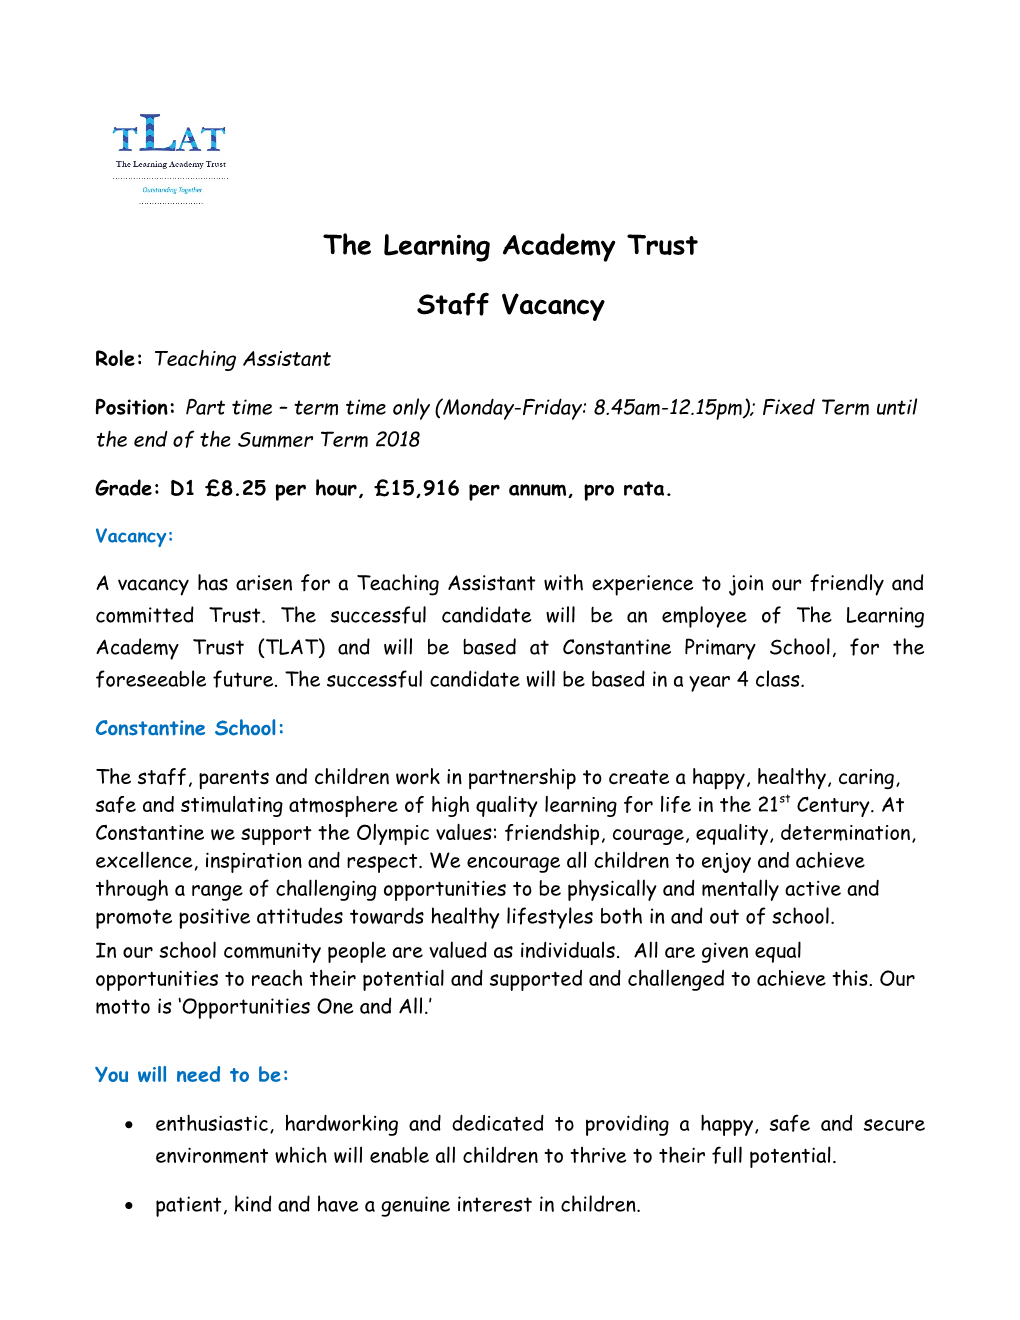 The Learning Academy Trust